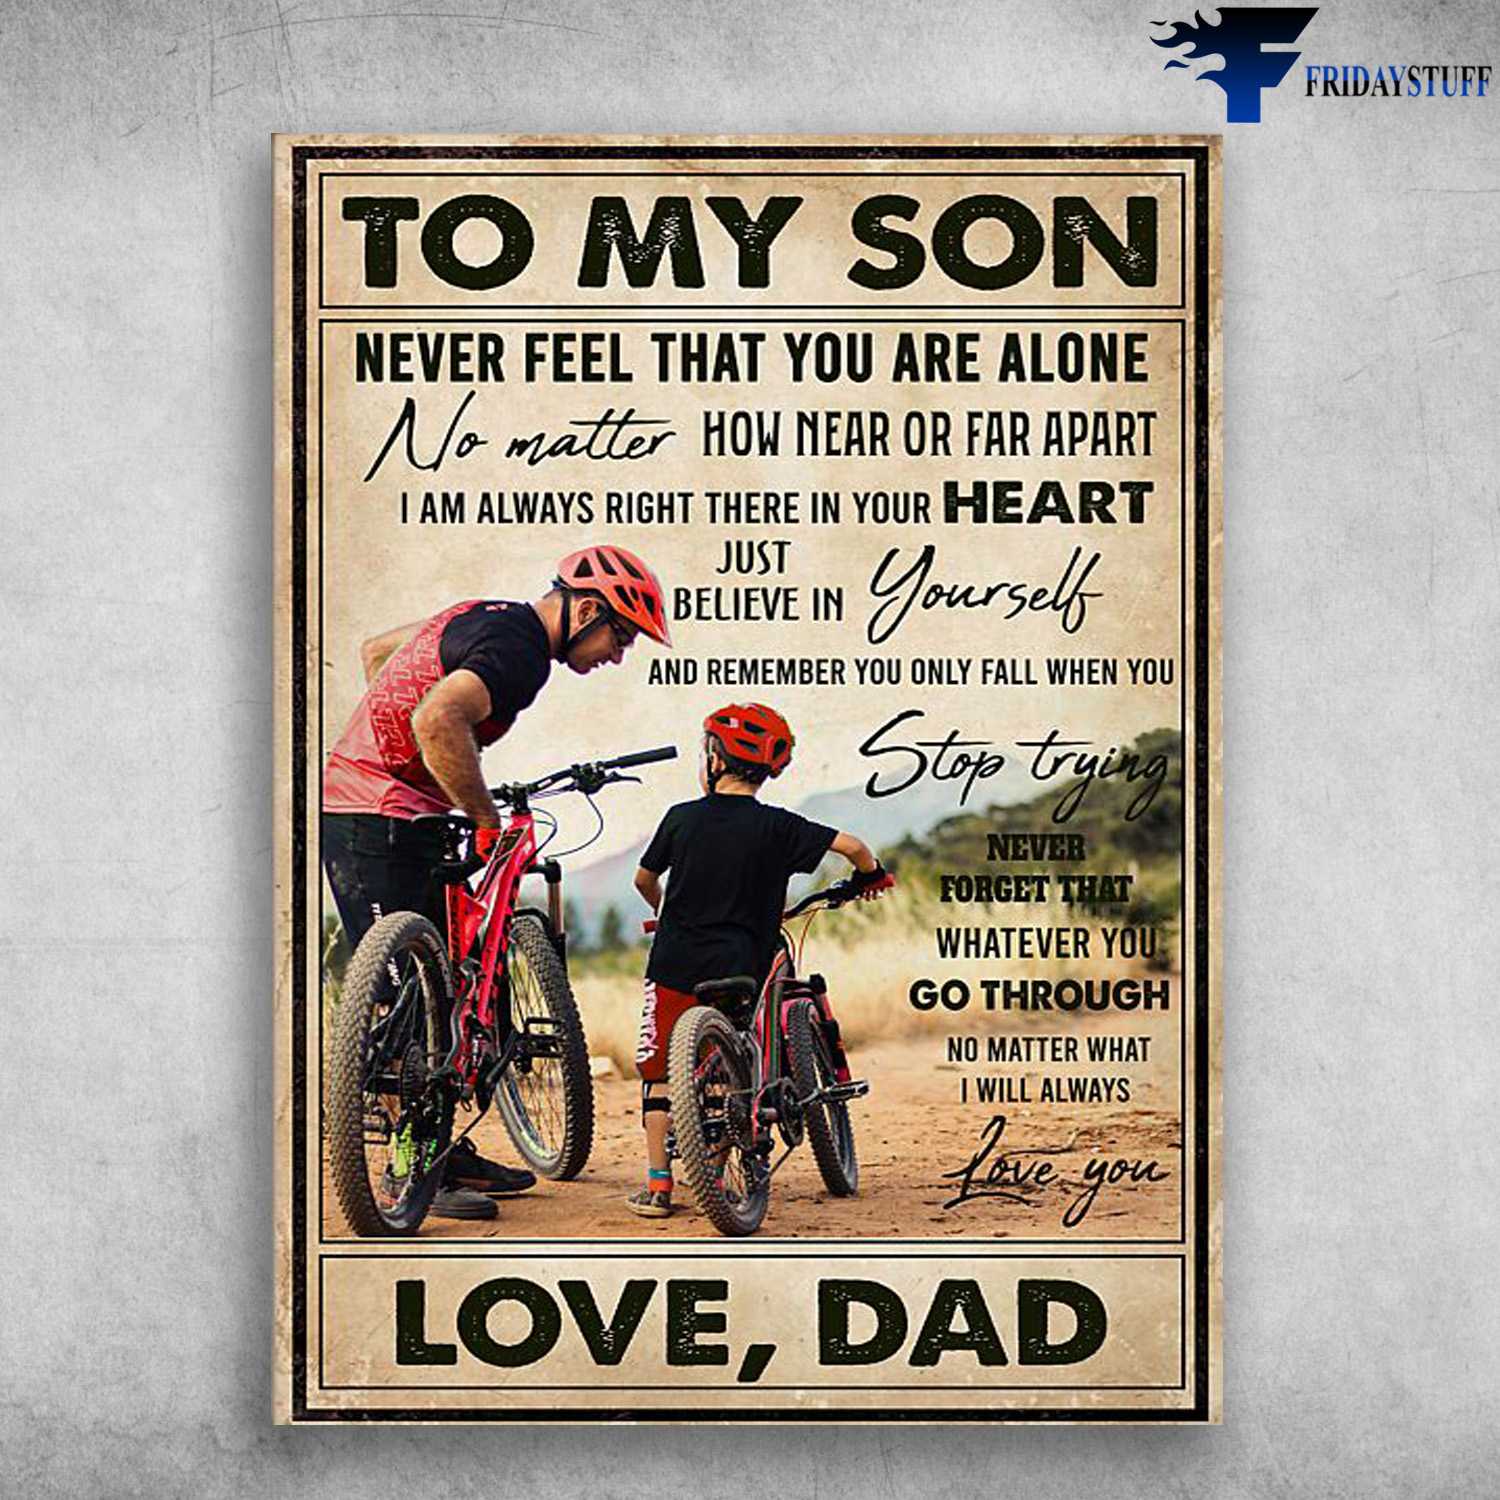 Dad And Son, Cycling With Son, To My Son, Never Feel That You Are Alone, No Matter How Near Or Far Apart, I Am Always Right, There In Your Heart